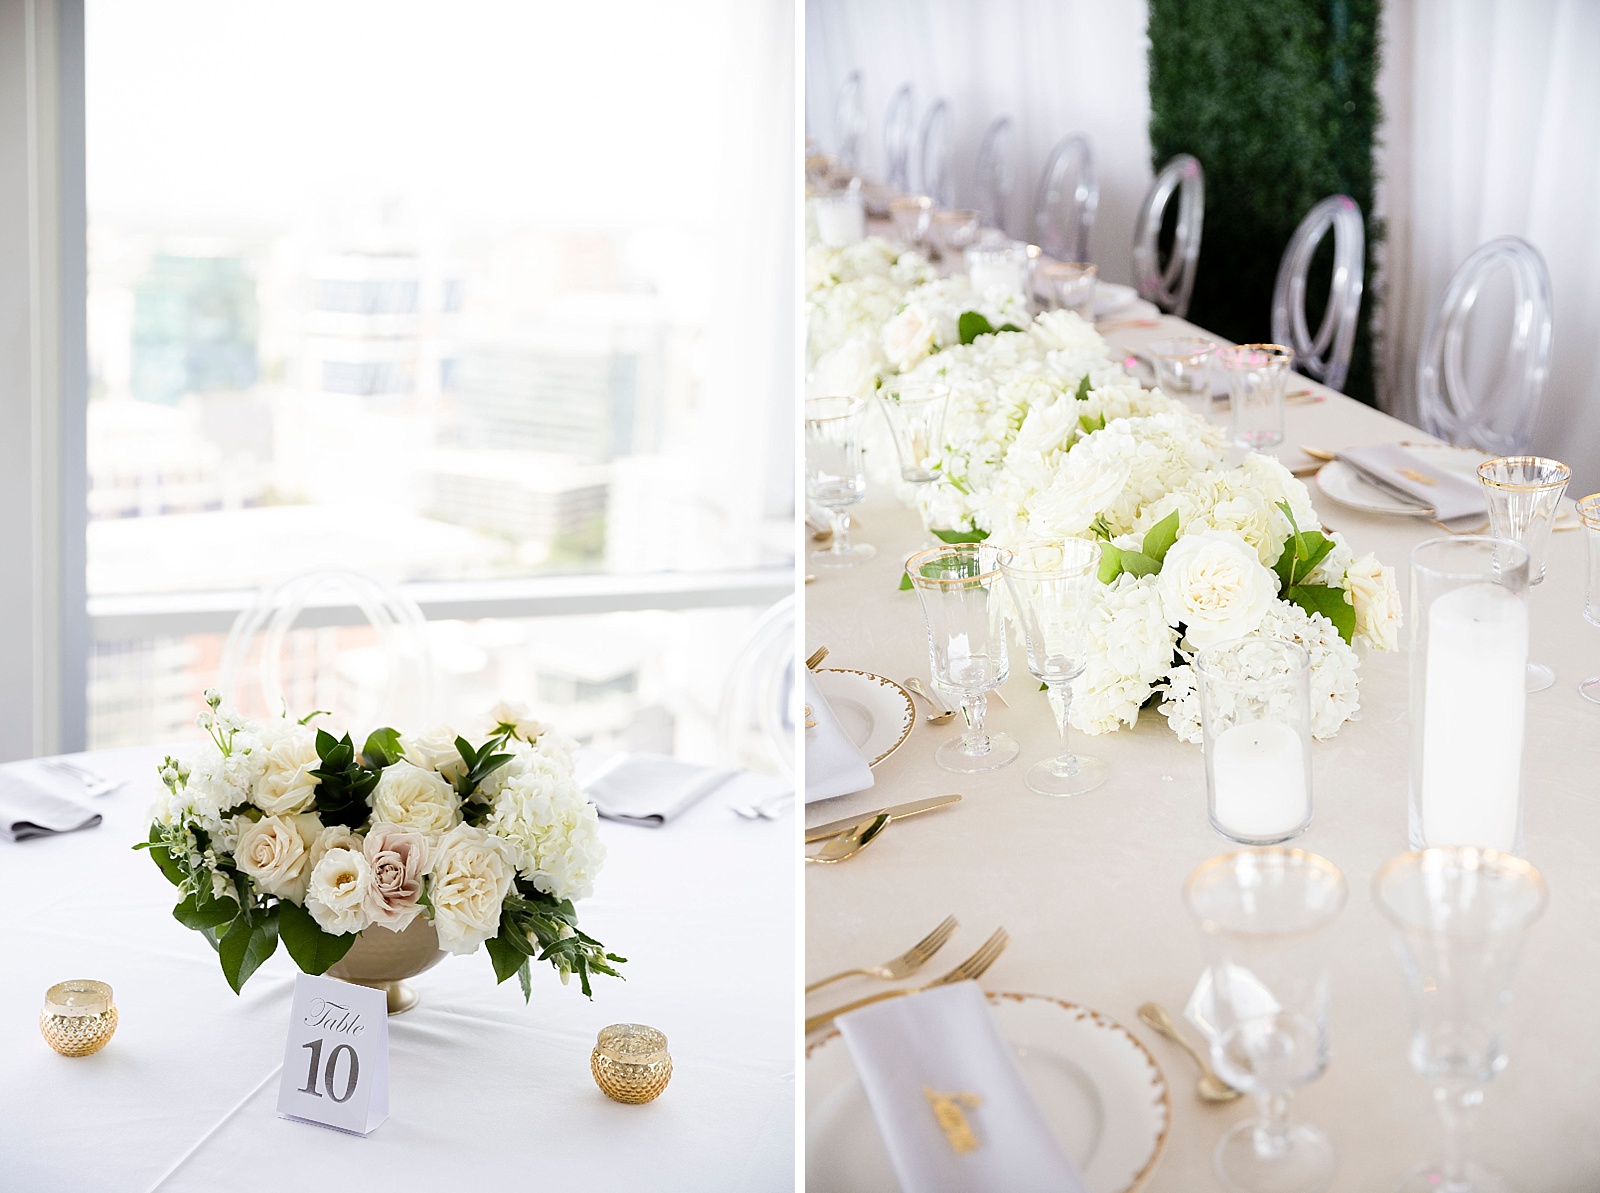 Randi Michelle Photography captures wedding reception at W Hotel Downtown Dallas